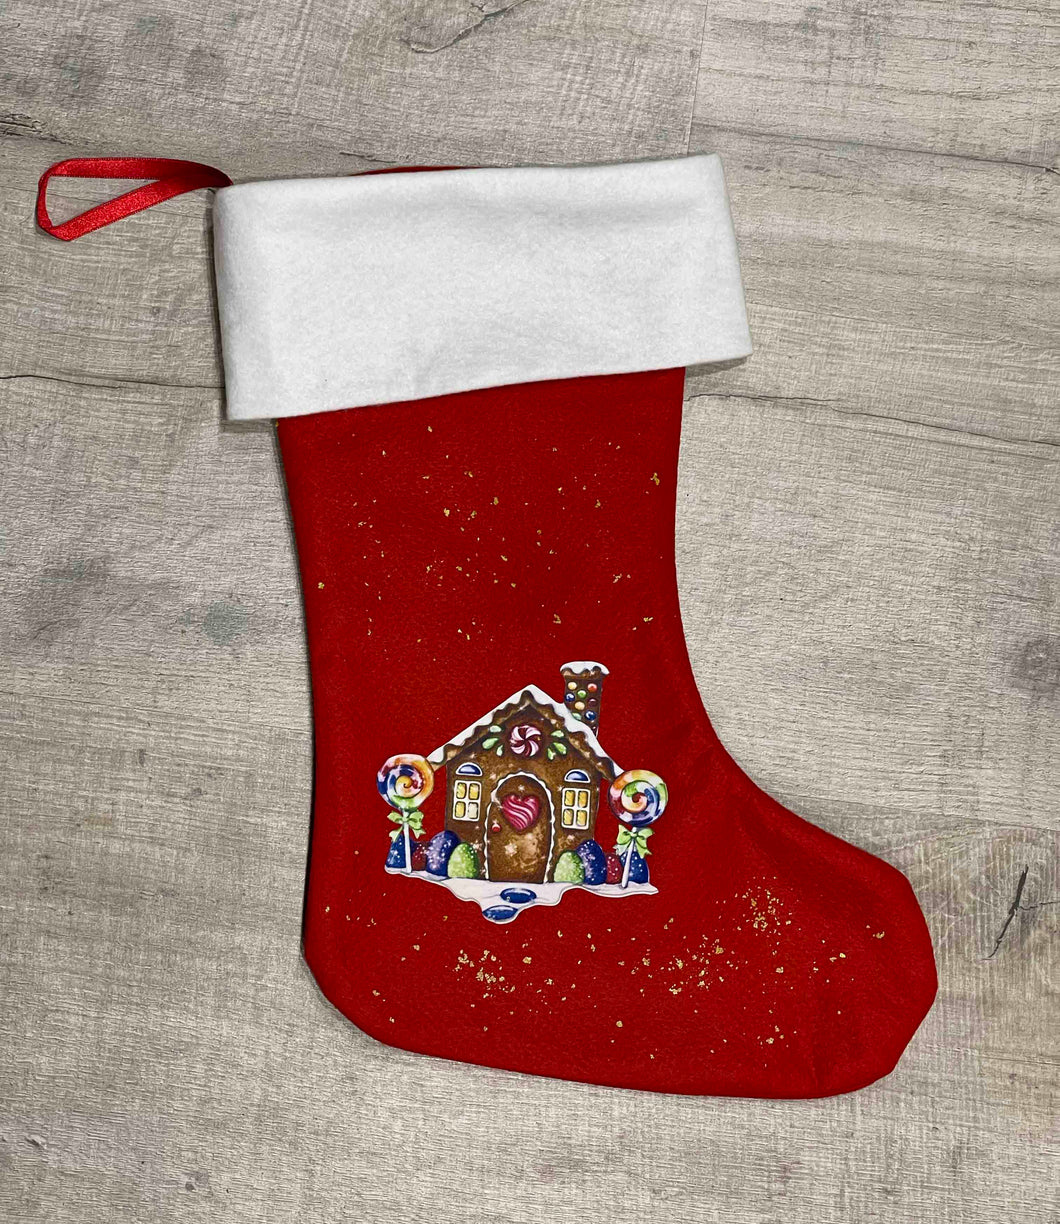 Personalized Christmas sock - Red Christmas boot decorated with first name - New